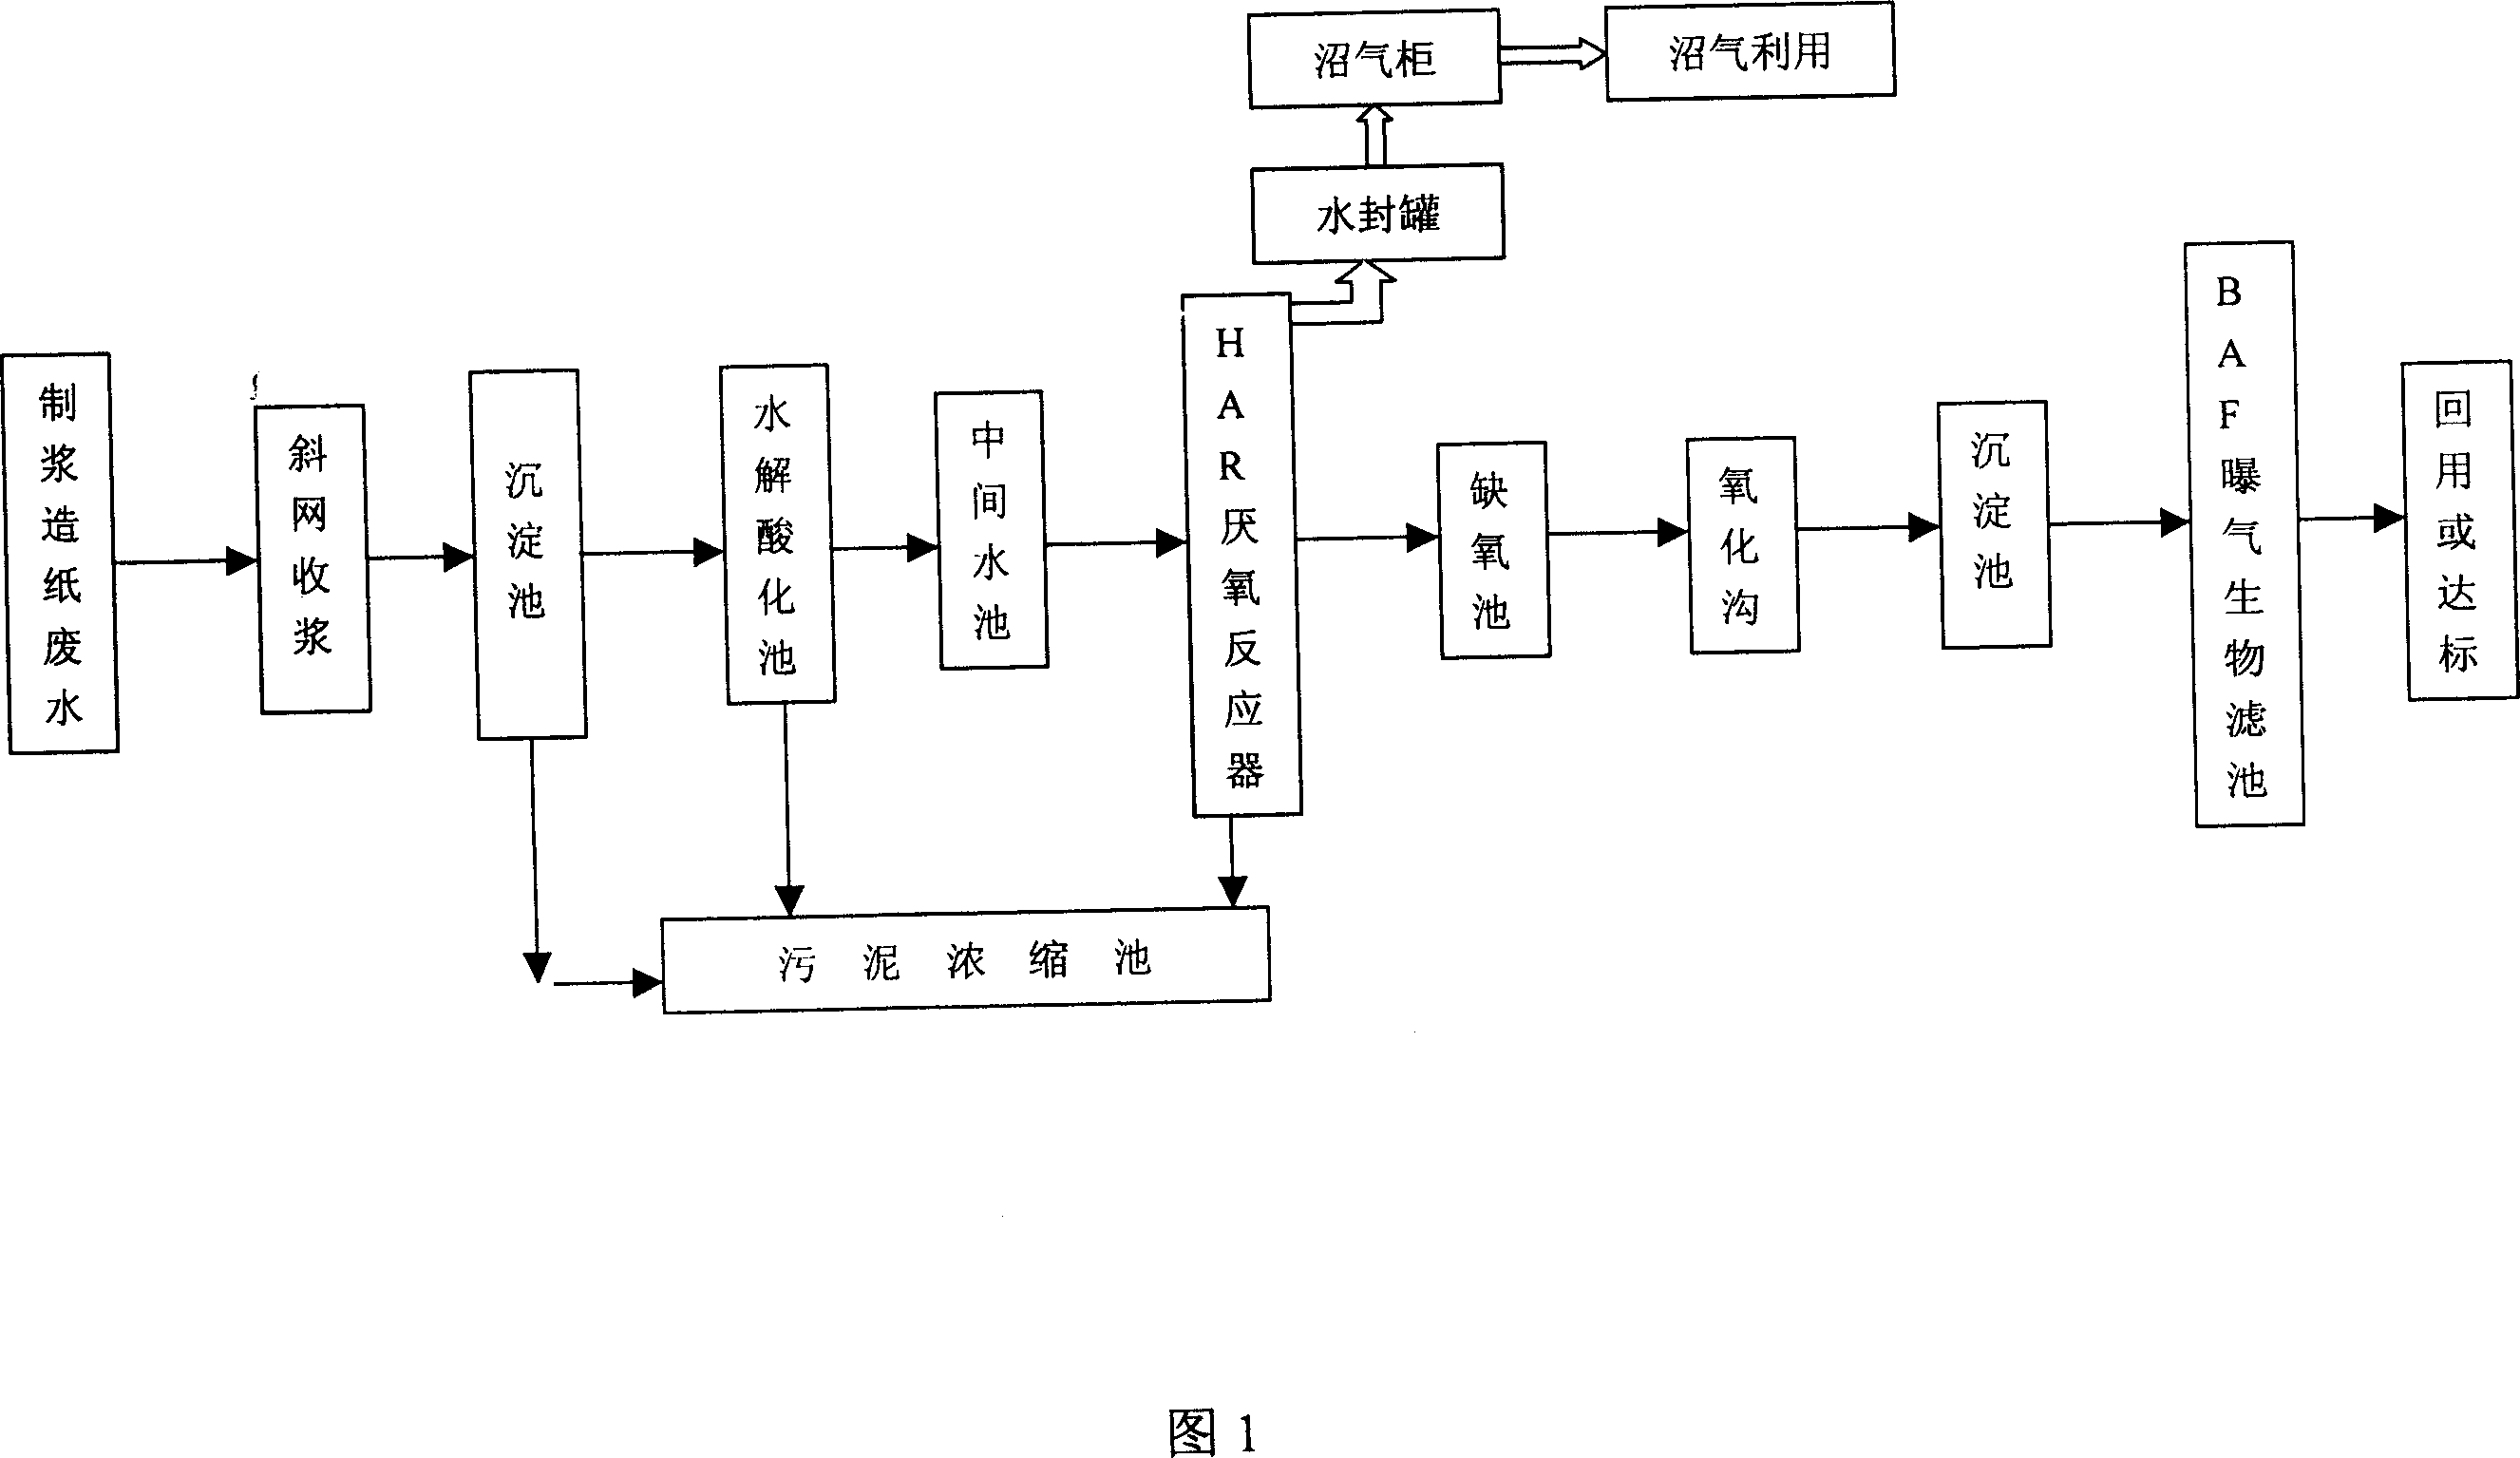 Paper-making effluent purifying treatment process